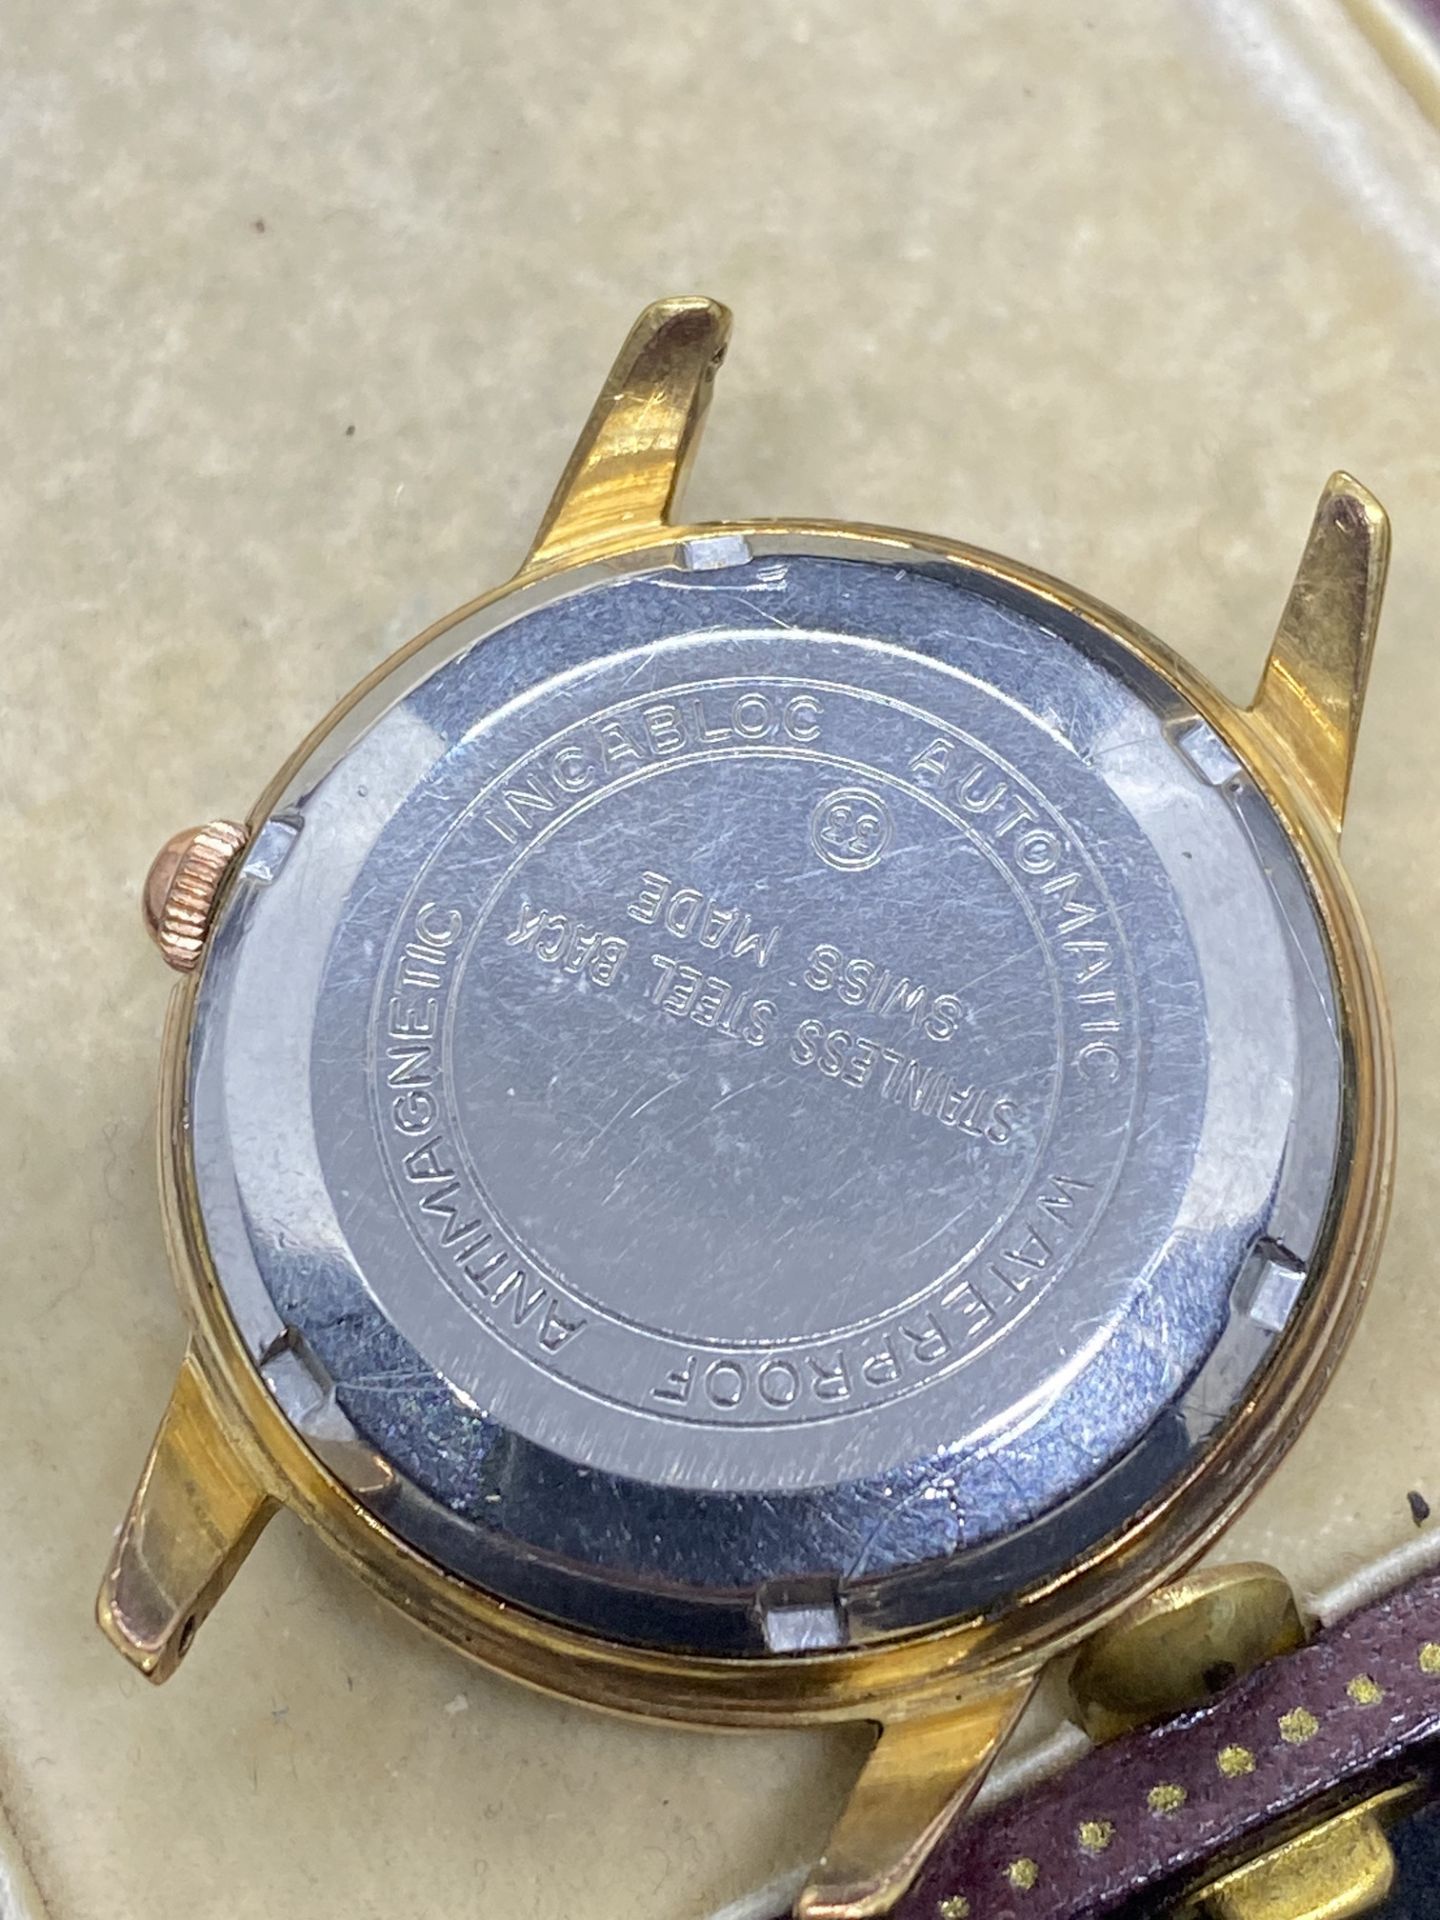 TRADITION 17 JEWELS REUSSER AUTOMATIC WATCH - Image 3 of 3